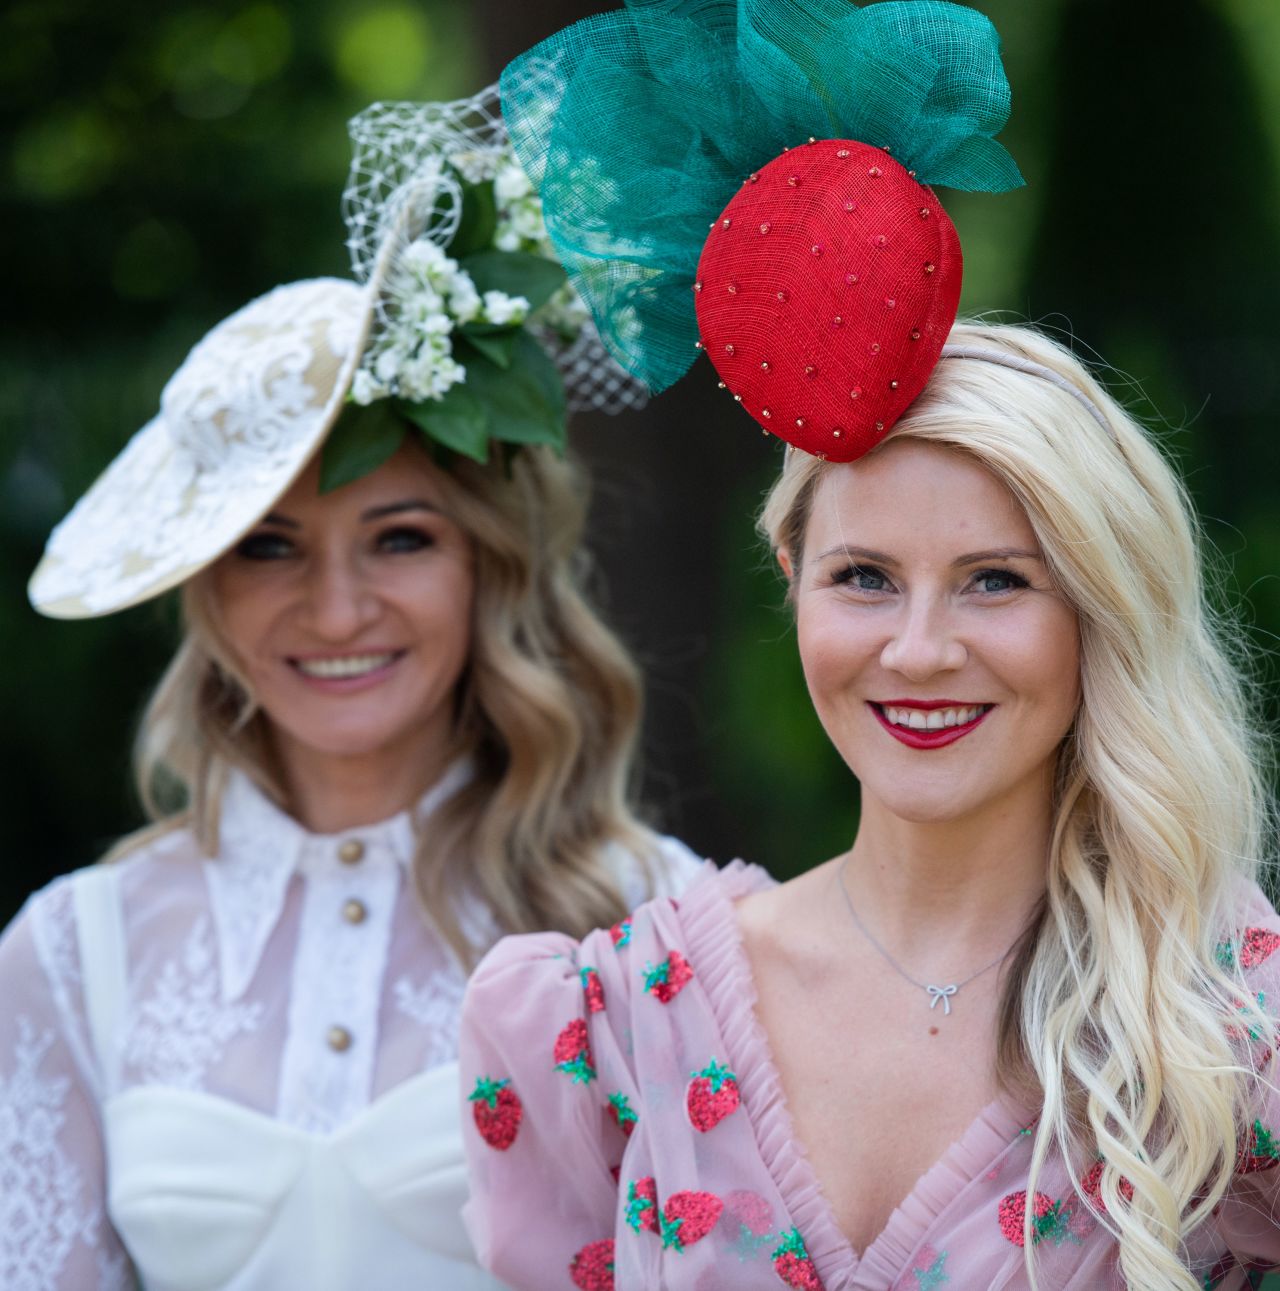 On Tuesday, one attendee wore a strawberry hat with green tulle leaves.